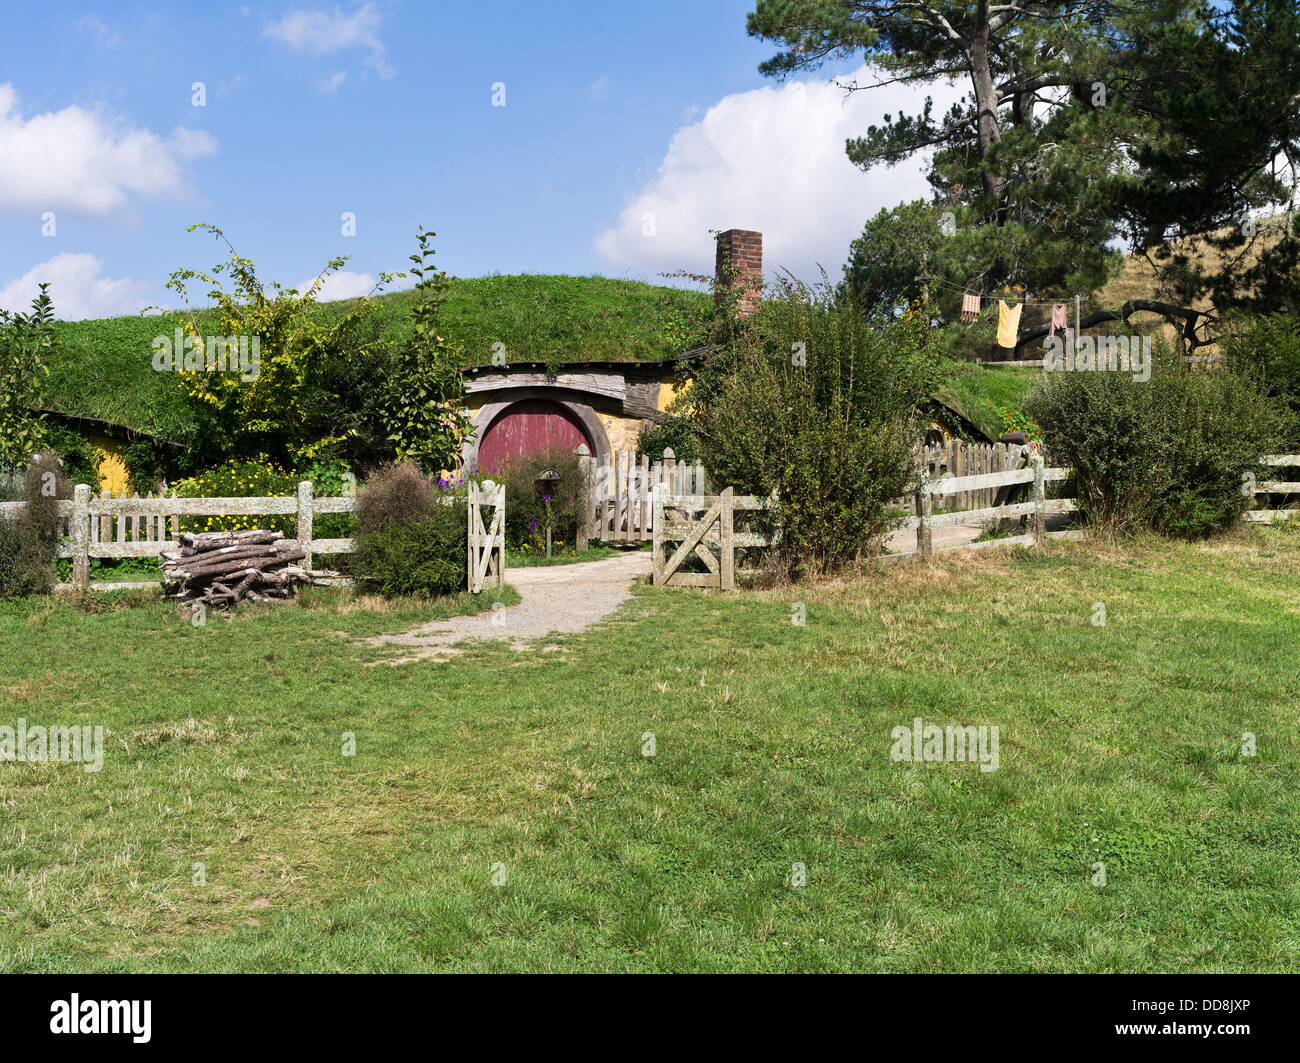 dh Lord of the Rings HOBBITON NEW ZEALAND Hobbits cottage garden film set movie site films middle earth hobbit house Stock Photo